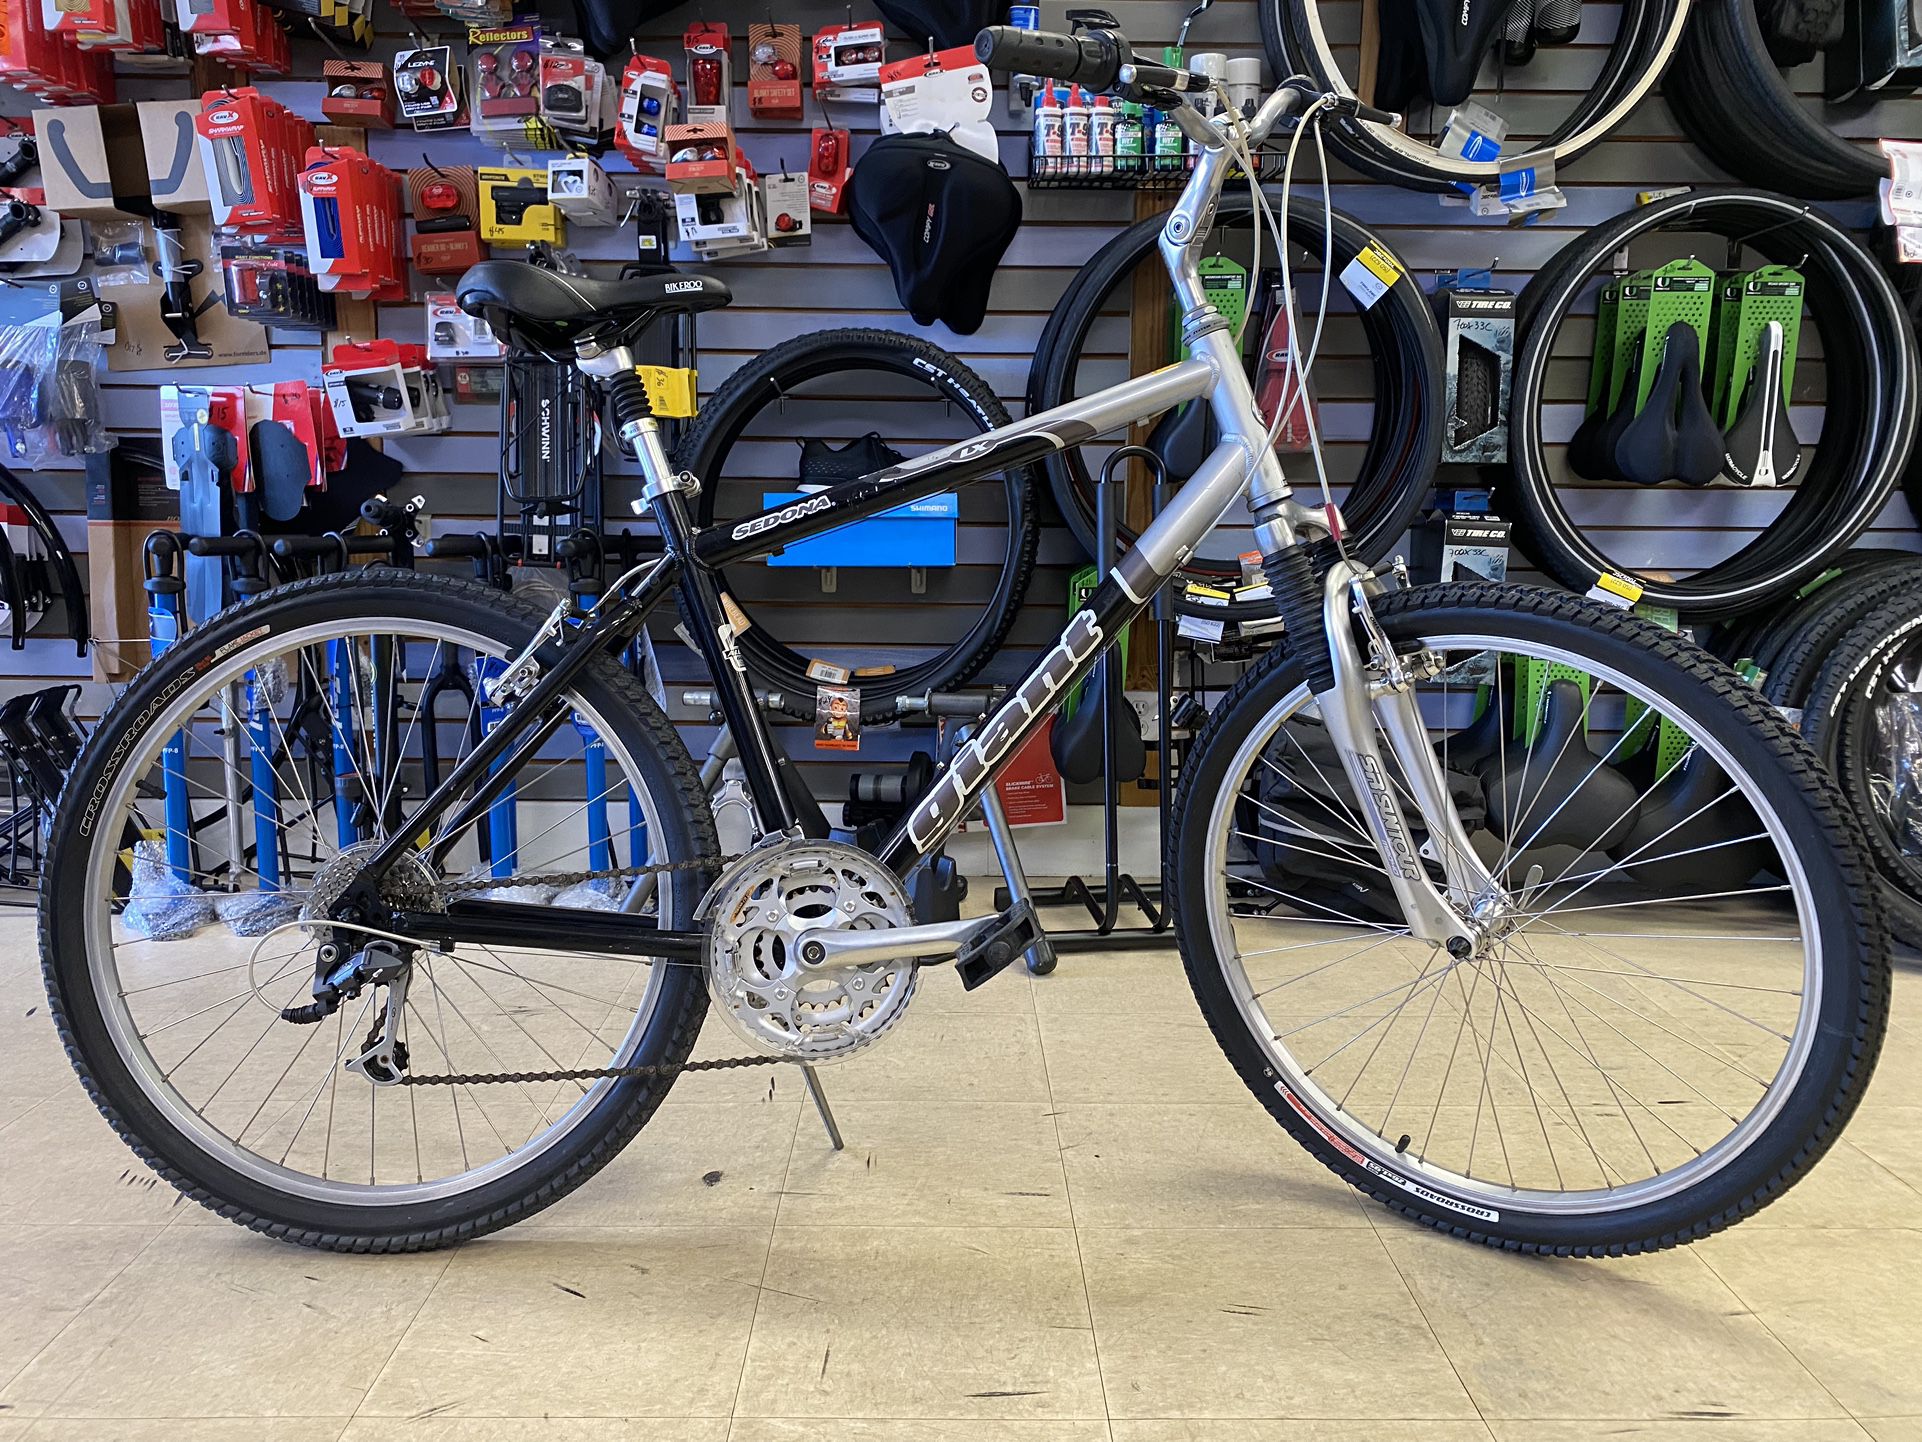 Giant Sedona LX, Aluminum Frame Size 19” LARGE, Tire Size 26X1.95,  24 Speeds Shimano DEORE LX, Free Delivery 